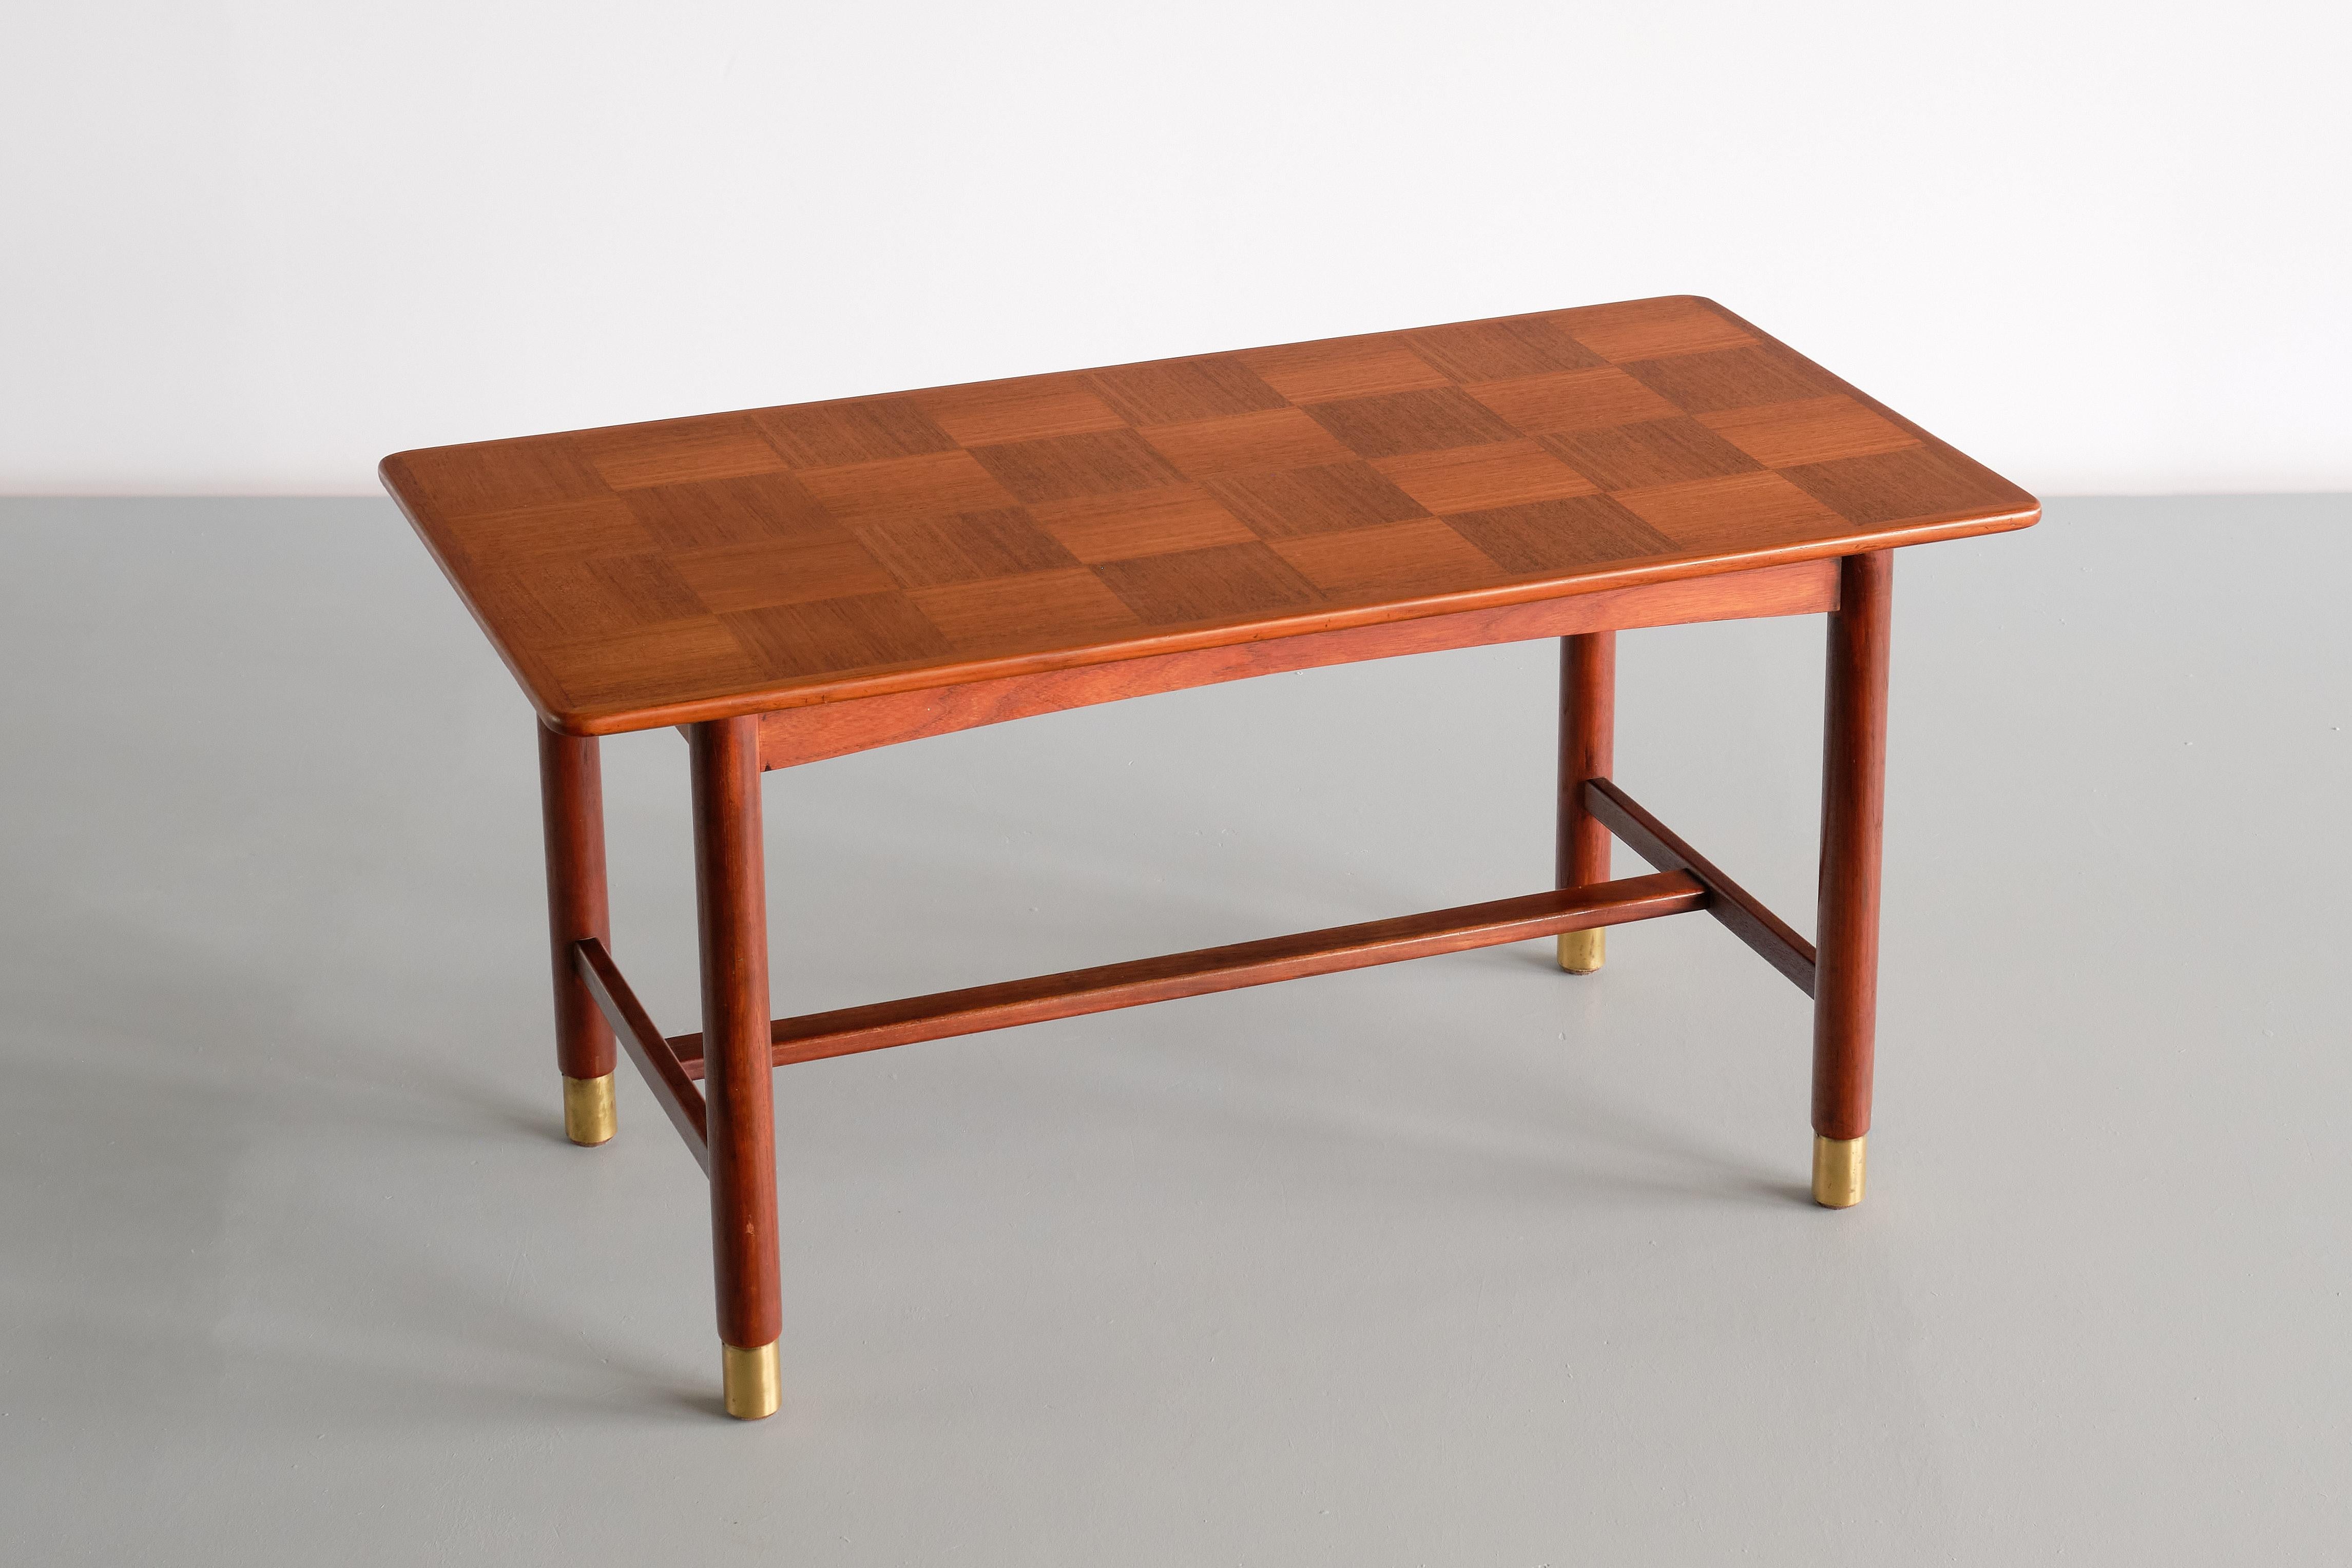 This elegant coffee table was designed by Carl-Axel Acking and produced by SMF Svenska Möbelfabriken in Bodafors, Sweden in the 1950s. The design is marked by the rectangular teak top, veneered in beautiful checkerboard pattern. The alternation